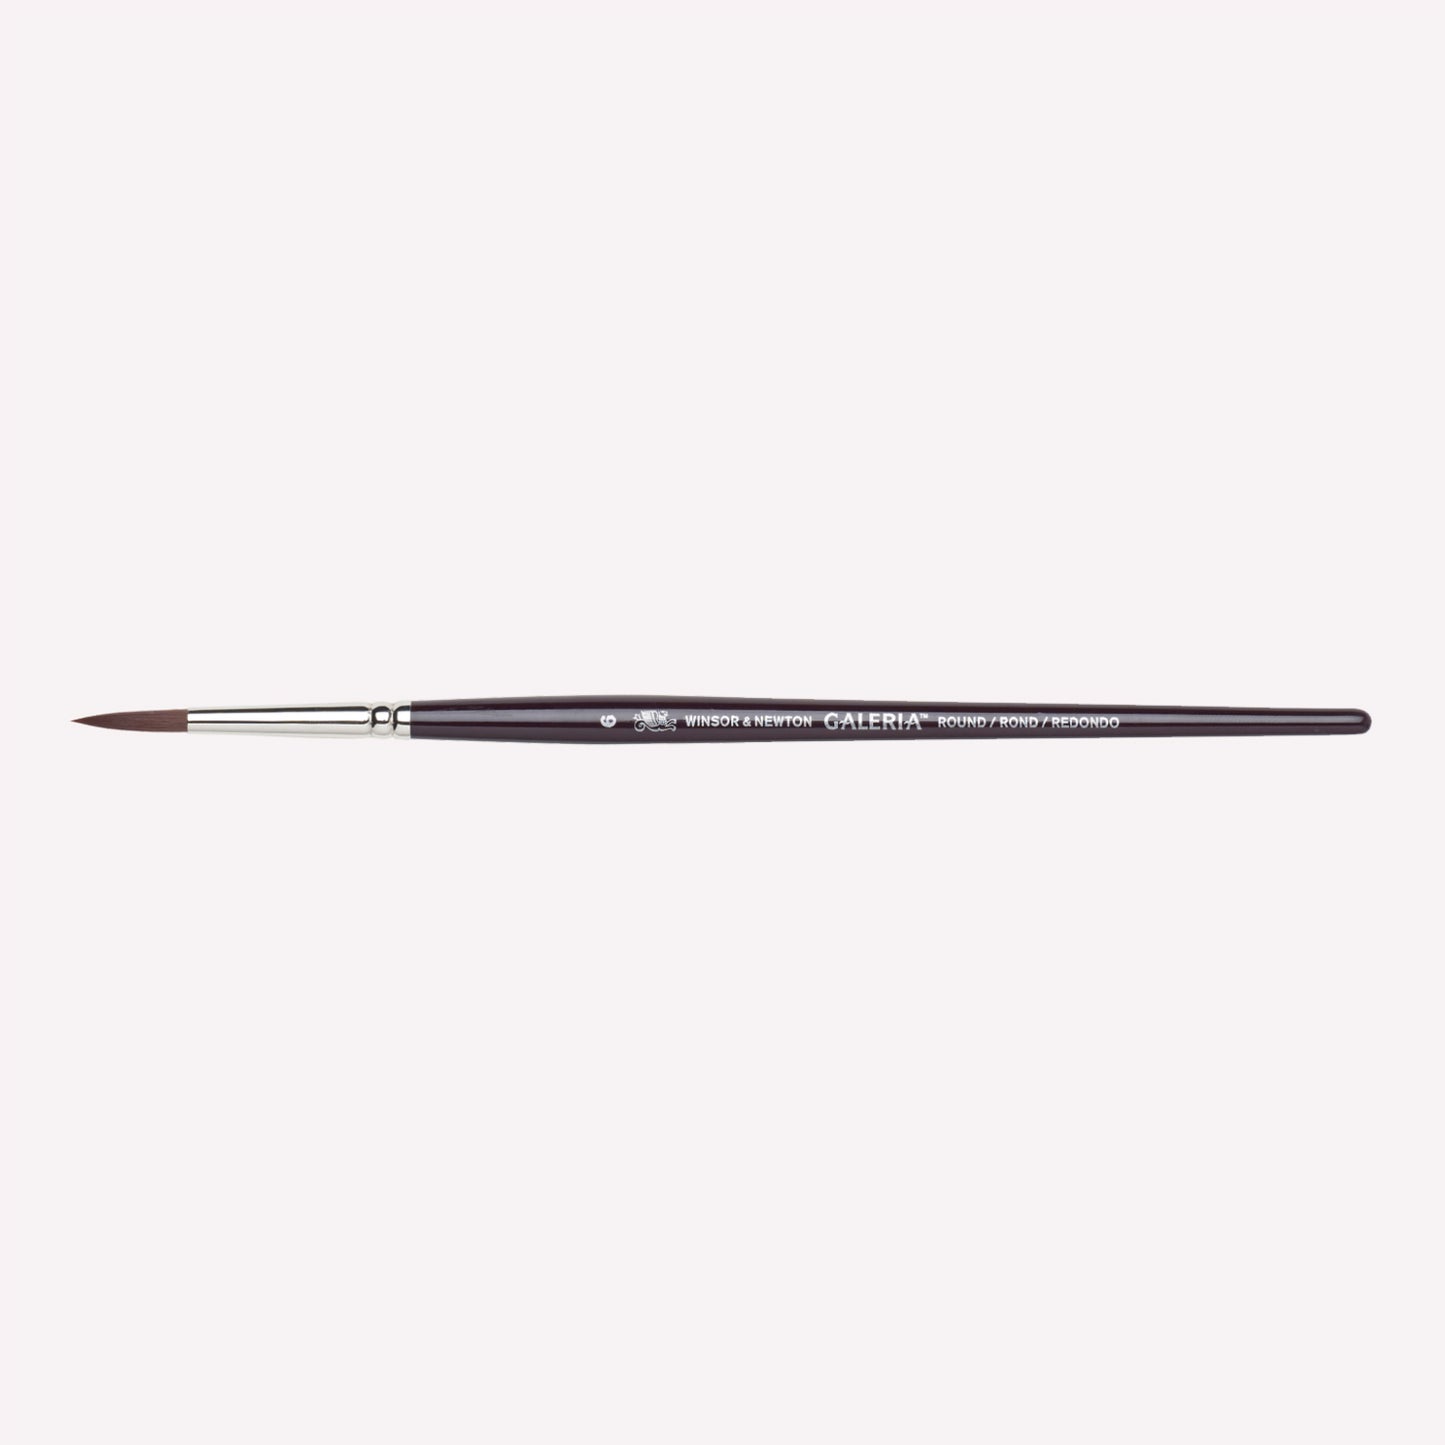 Winsor & Newton Galeria Round paintbrush in size 6. Brushes have synthetic filaments, and short wooden handles. 